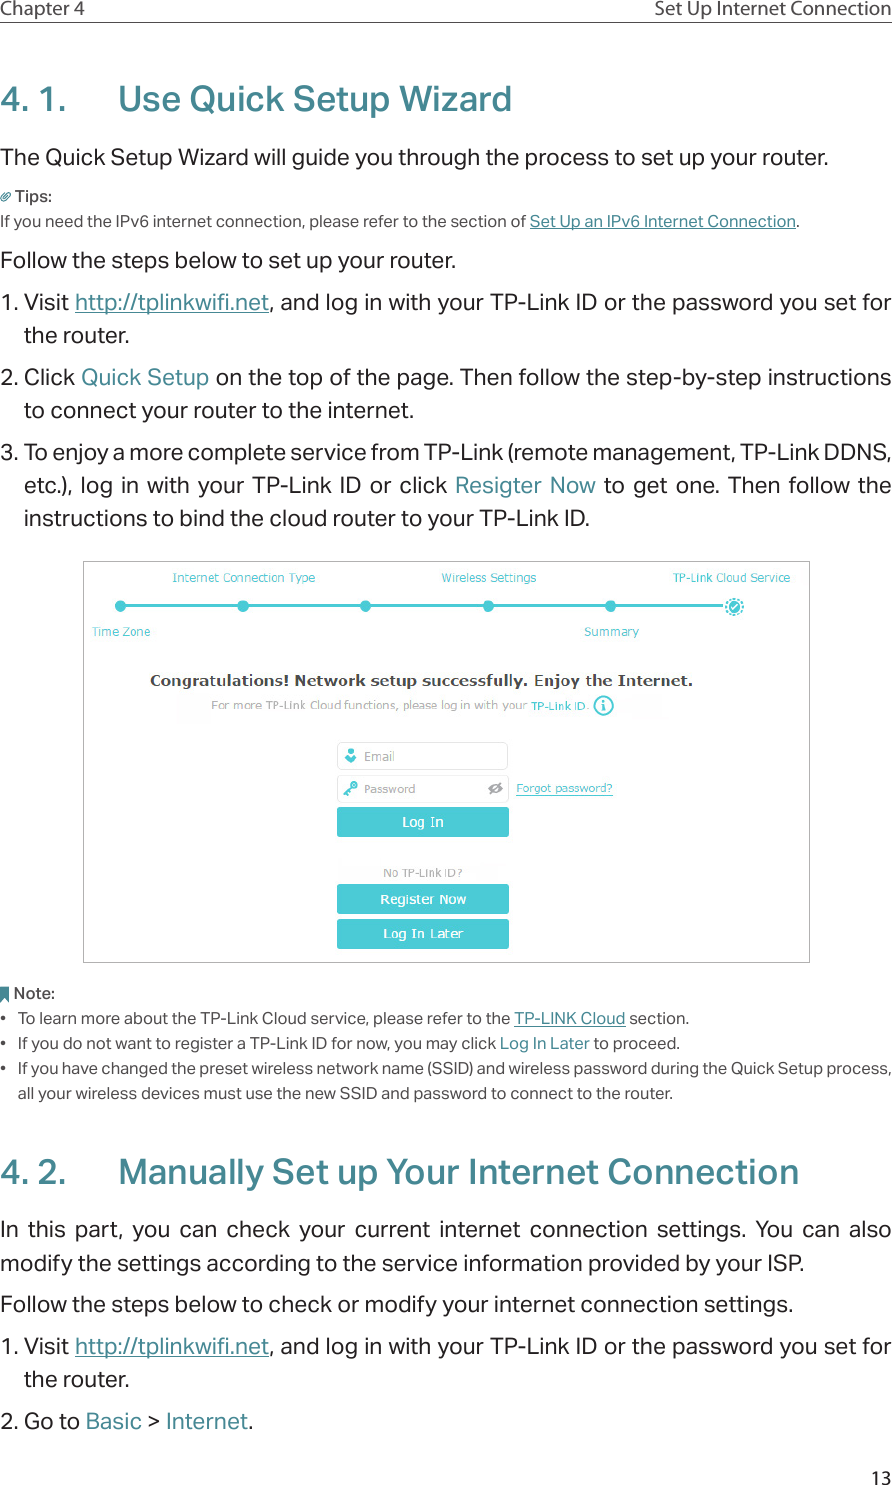 13Chapter 4 Set Up Internet Connection4. 1.  Use Quick Setup WizardThe Quick Setup Wizard will guide you through the process to set up your router.Tips:If you need the IPv6 internet connection, please refer to the section of Set Up an IPv6 Internet Connection.Follow the steps below to set up your router.1. Visit http://tplinkwifi.net, and log in with your TP-Link ID or the password you set for the router.2. Click Quick Setup on the top of the page. Then follow the step-by-step instructions to connect your router to the internet.3. To enjoy a more complete service from TP-Link (remote management, TP-Link DDNS, etc.), log in with your TP-Link ID or click Resigter Now to get one. Then follow the instructions to bind the cloud router to your TP-Link ID.Note:•  To learn more about the TP-Link Cloud service, please refer to the TP-LINK Cloud section.•  If you do not want to register a TP-Link ID for now, you may click Log In Later to proceed.•  If you have changed the preset wireless network name (SSID) and wireless password during the Quick Setup process, all your wireless devices must use the new SSID and password to connect to the router.4. 2.  Manually Set up Your Internet Connection In this part, you can check your current internet connection settings. You can also modify the settings according to the service information provided by your ISP.Follow the steps below to check or modify your internet connection settings.1. Visit http://tplinkwifi.net, and log in with your TP-Link ID or the password you set for the router.2. Go to Basic &gt; Internet.